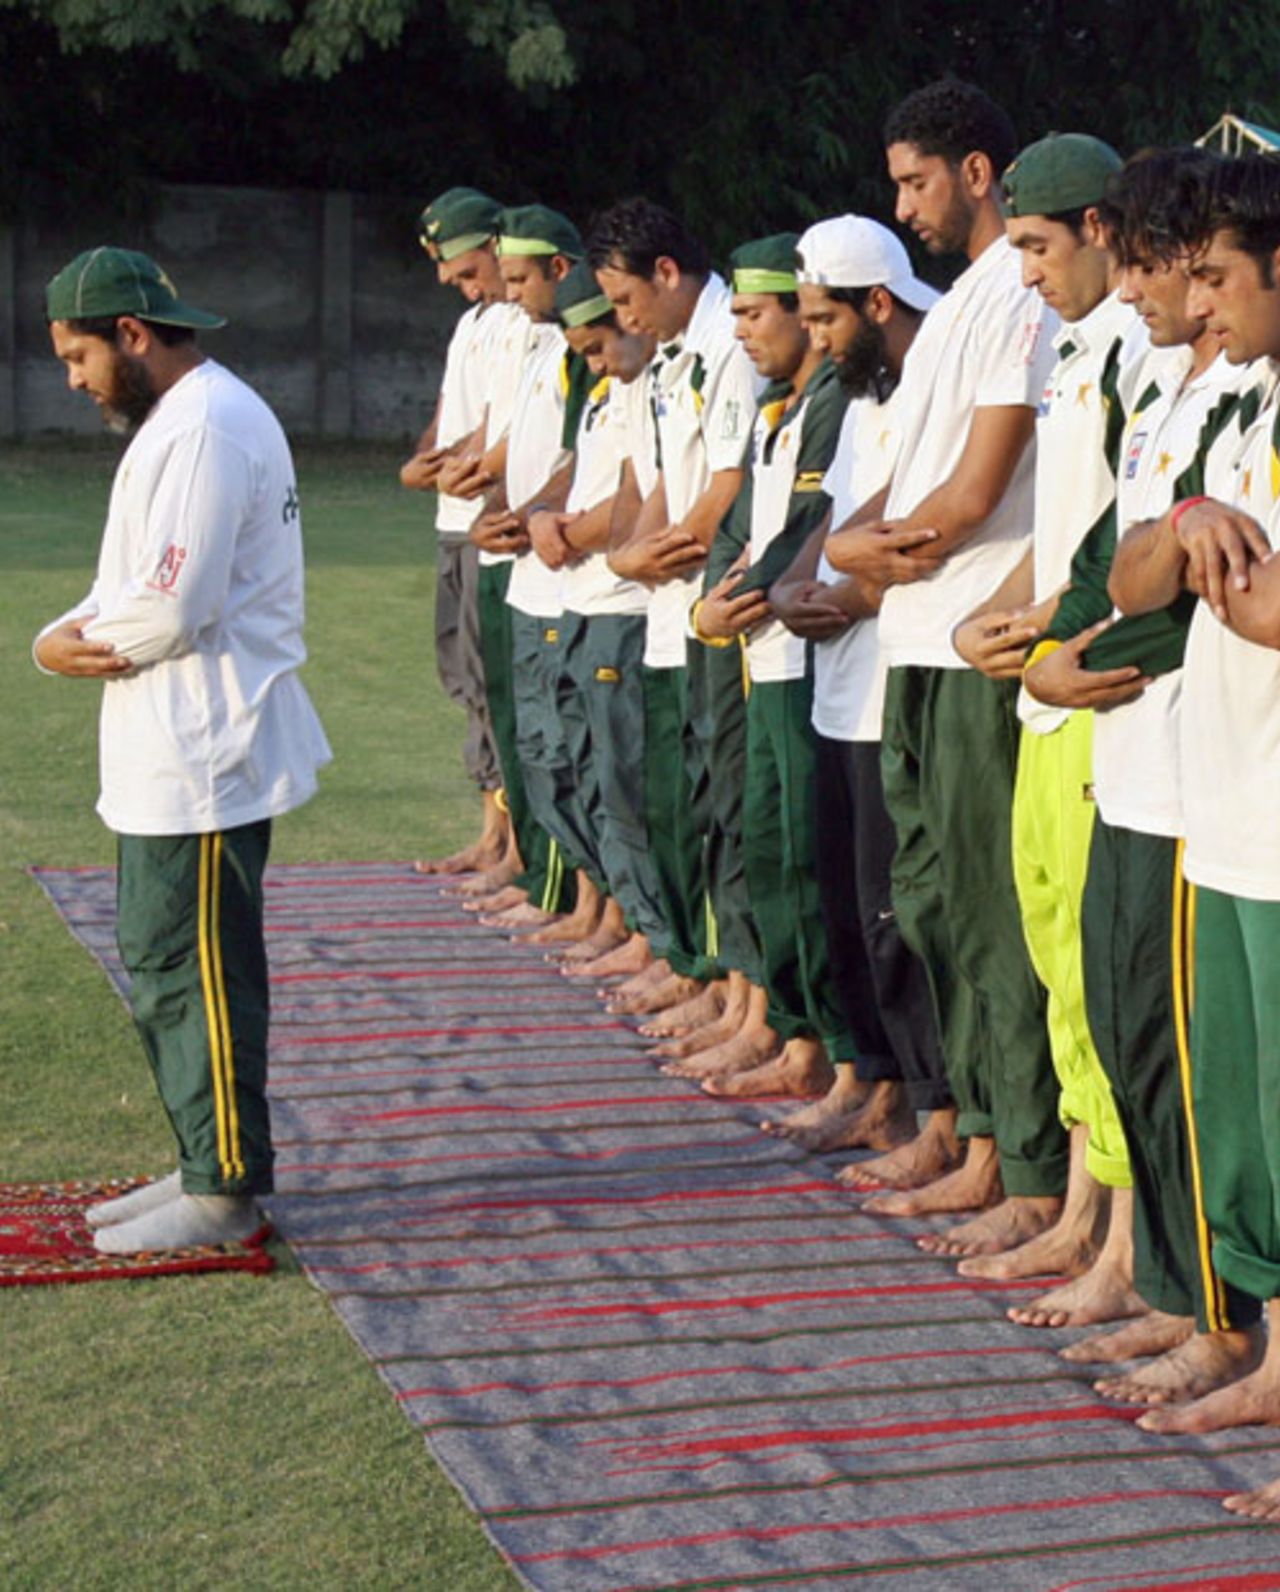 Pakistani cricketers offer prayers, Lahore, October 4, 2006